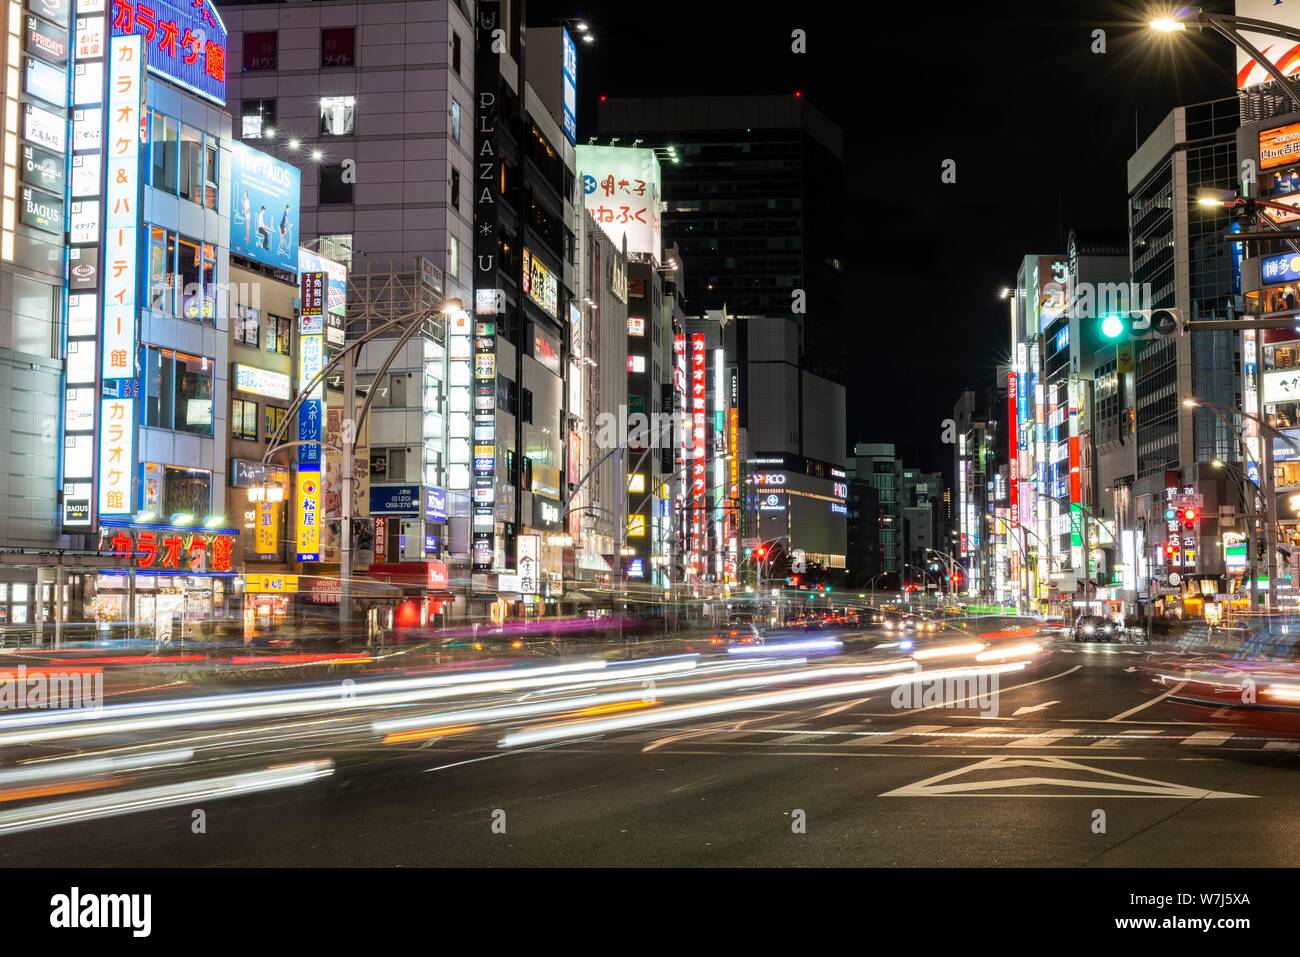 Busy street with cars, long exposure, street scene at night, Tokyo, Japan Stock Photo